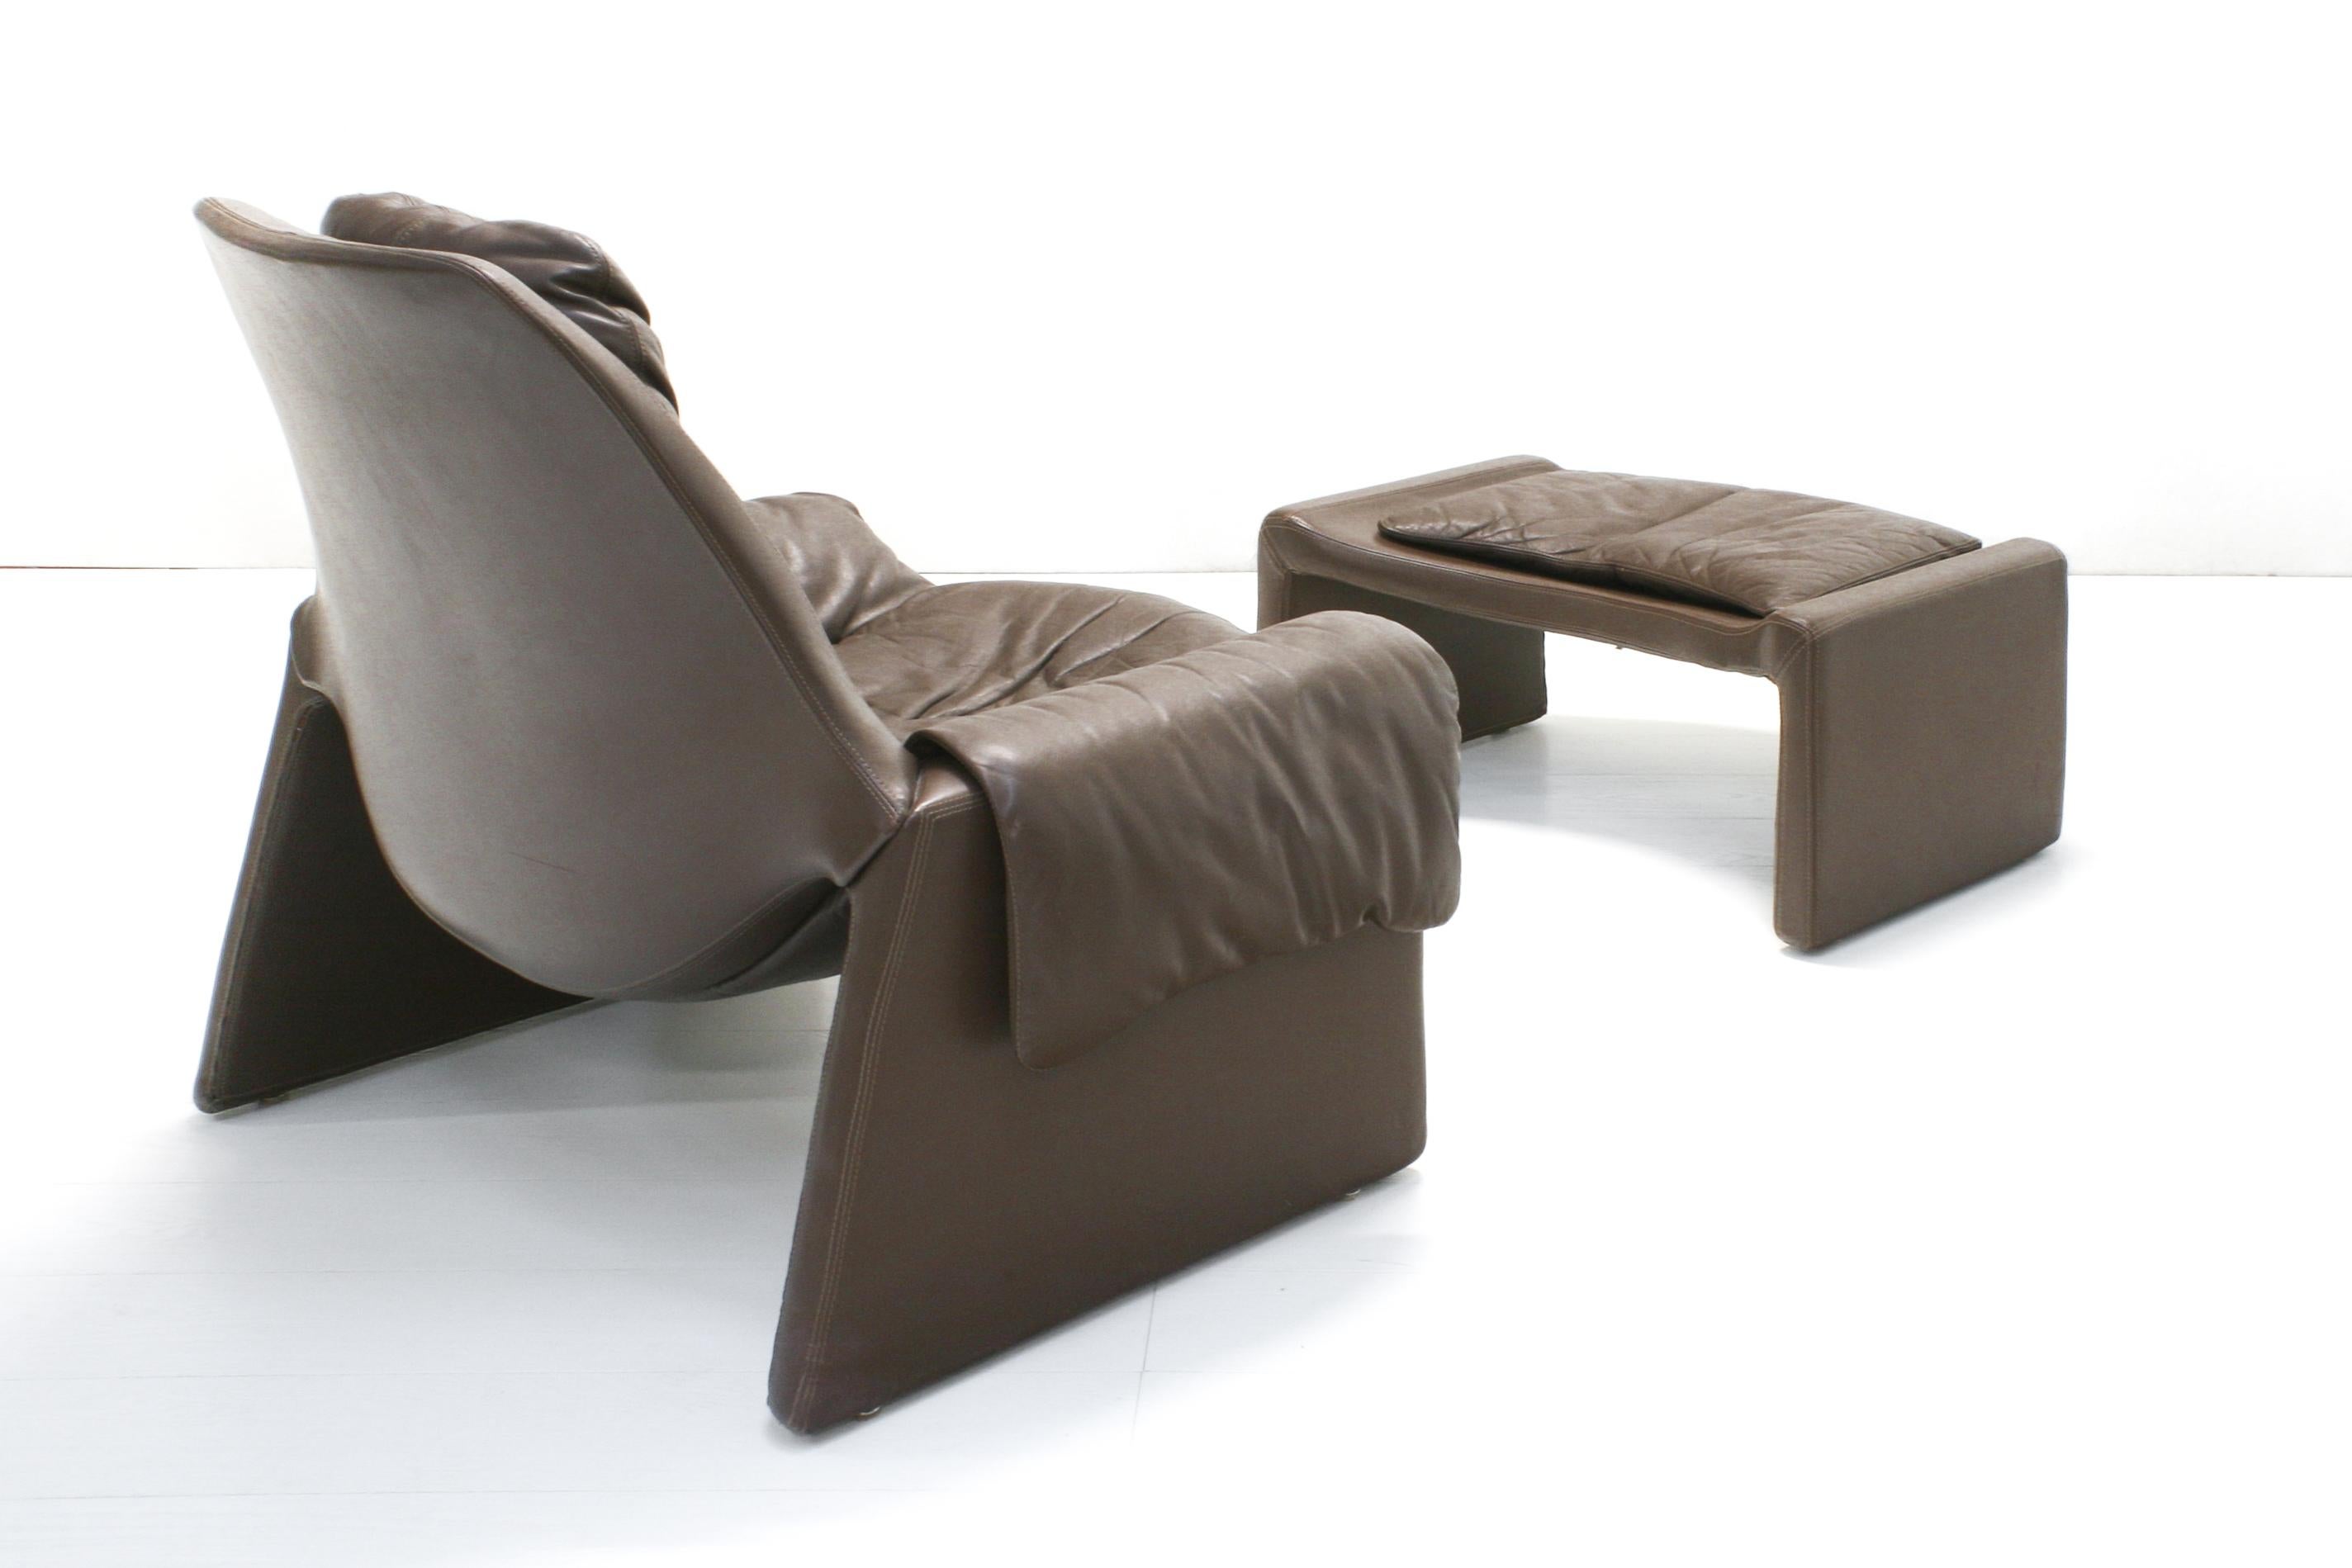 1970s Proposals P60 Lounge Chair & P61 Ottoman by Vittorio Introini for Saporiti In Good Condition For Sale In Izegem, VWV